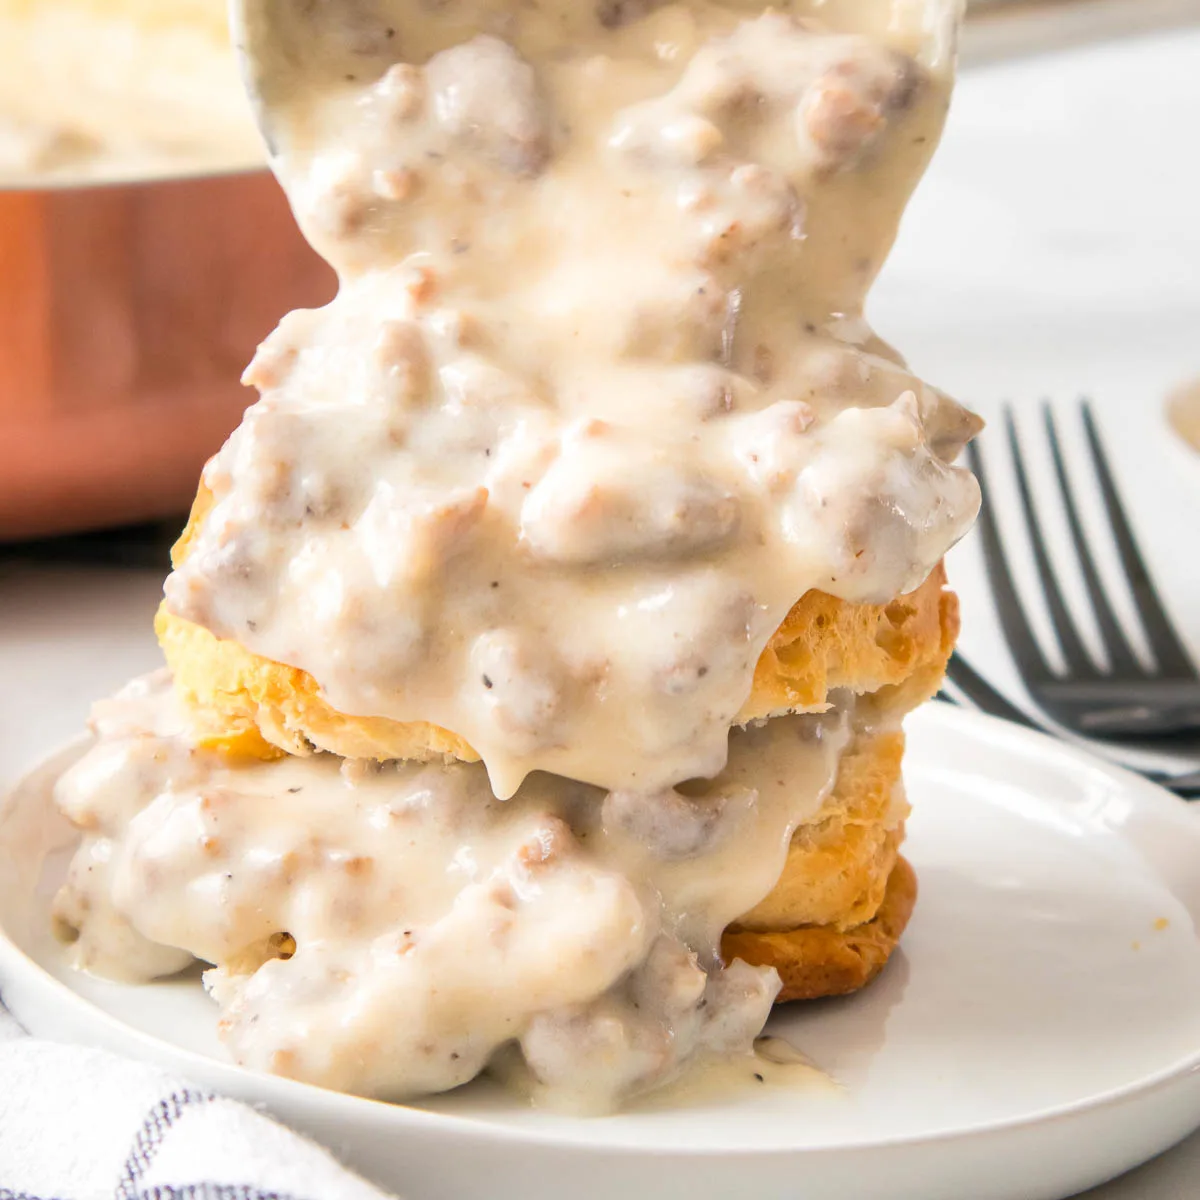 Ladling sausage gravy over a biscuit